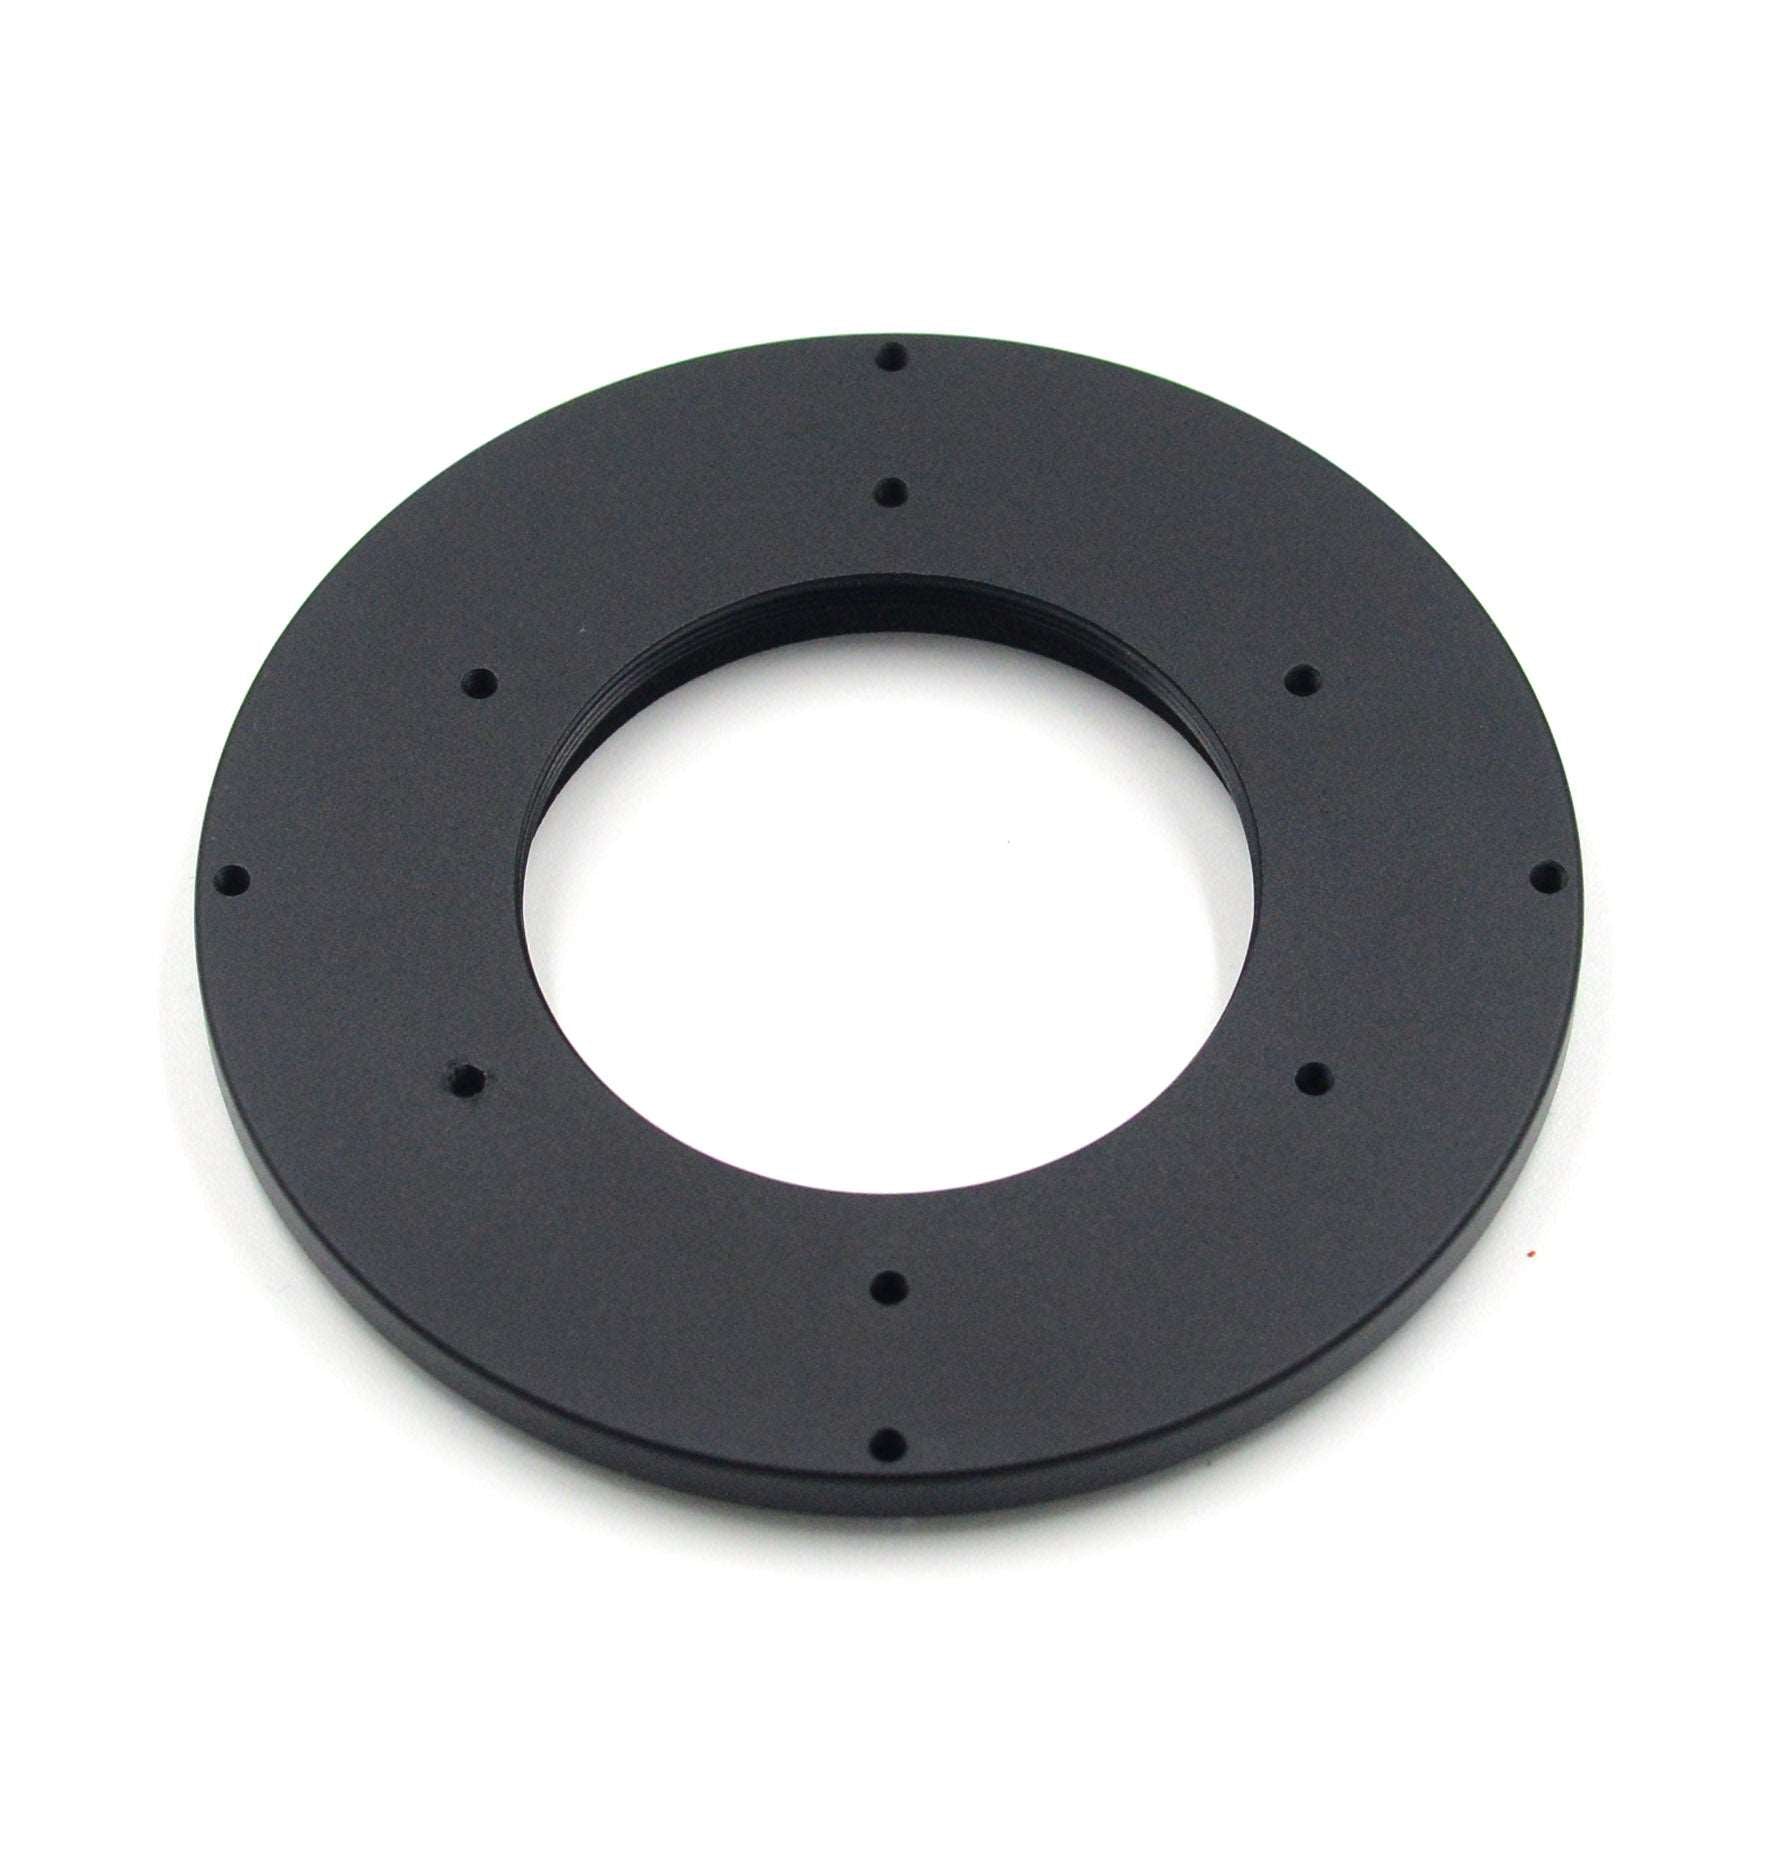 M48 Compatible Tilt Plate for Player One Cooled Camera | Dark Clear Skies